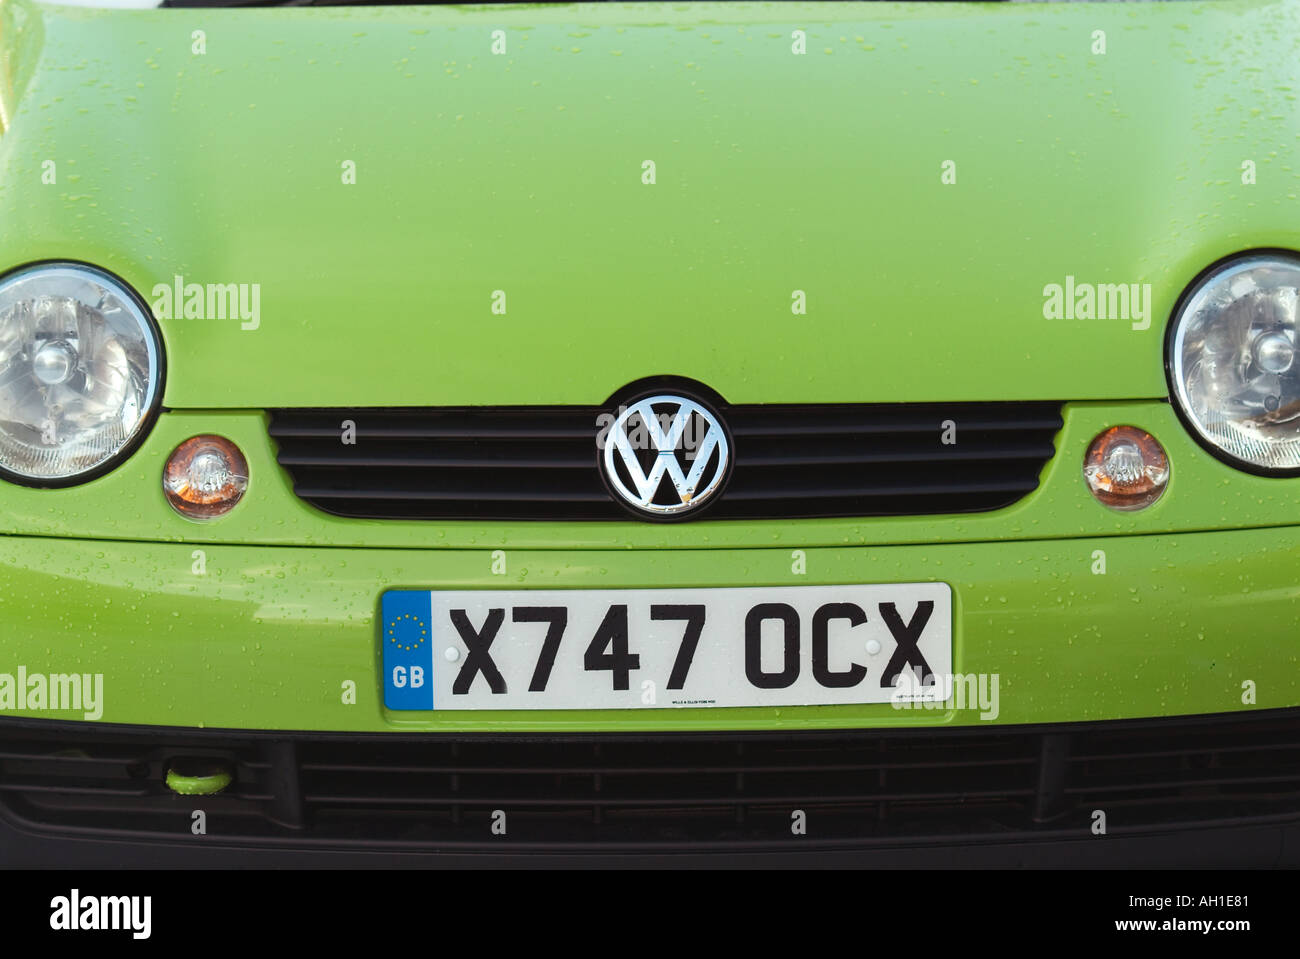 VW lupo city car number plate altered from orginal number volkswagen people car commute travel small green german car maker man Stock Photo